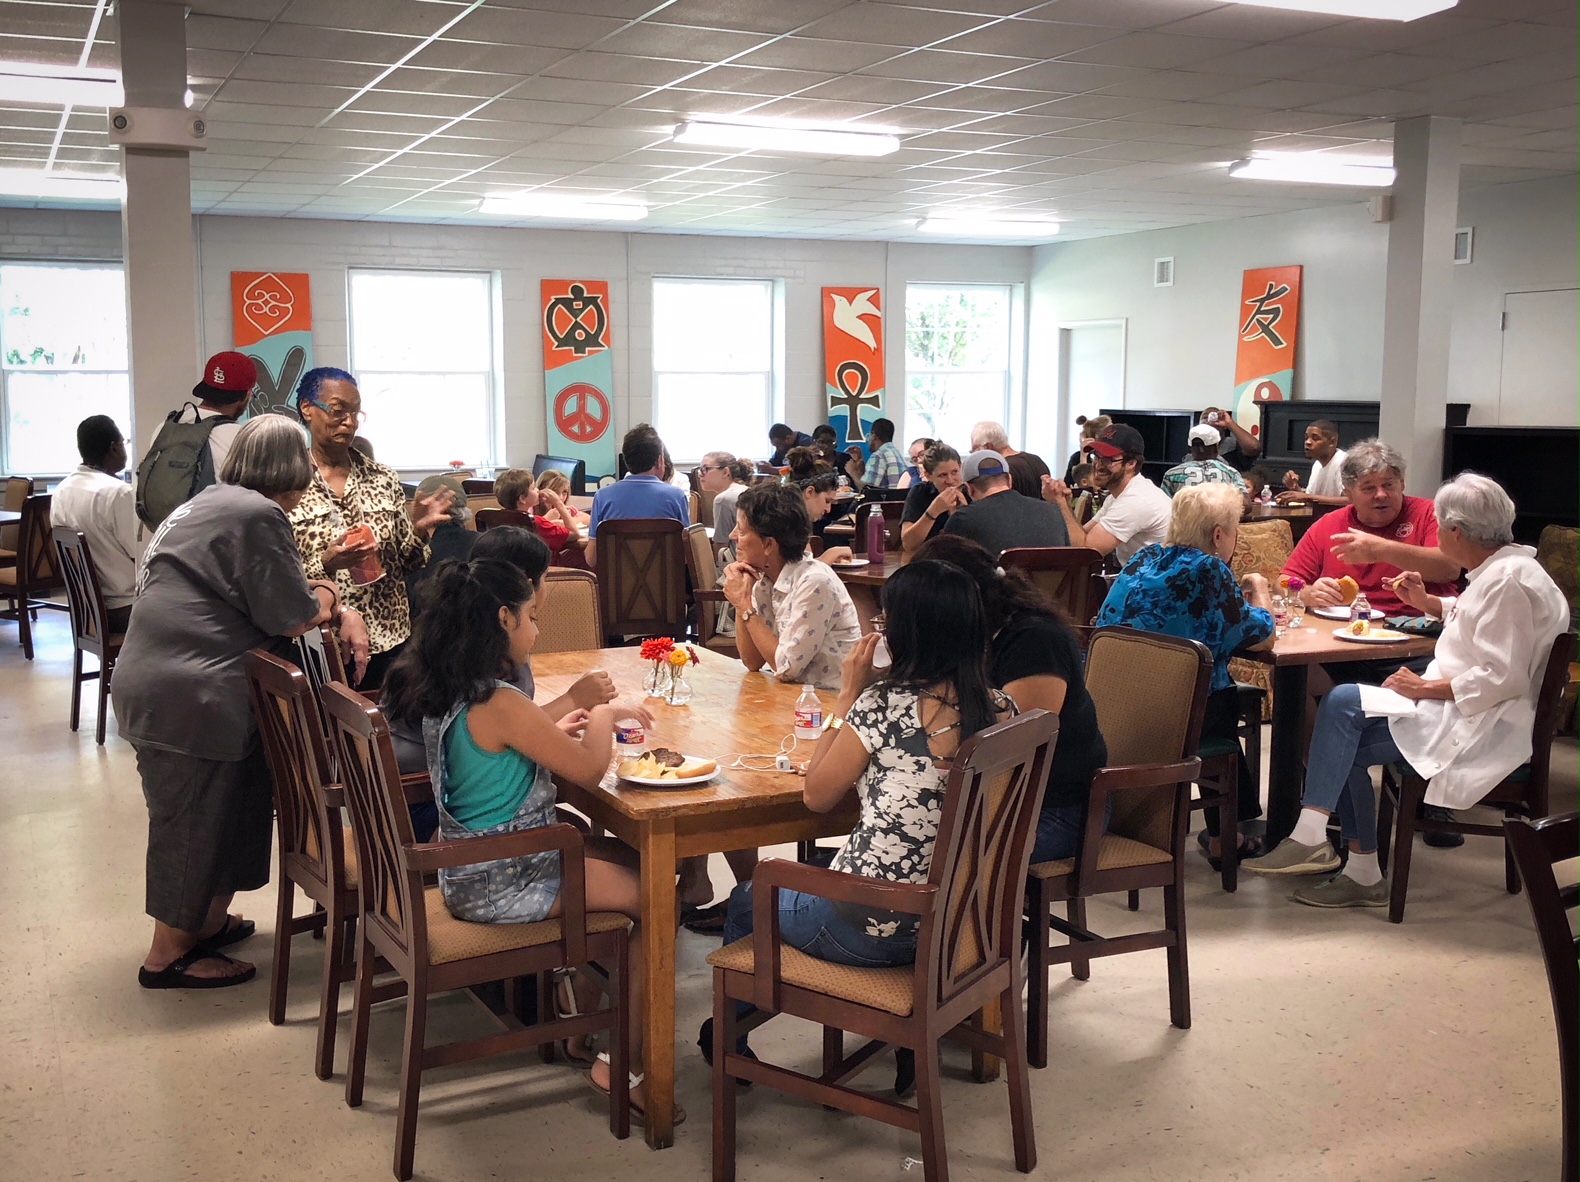 Community members sat down to enjoy hamburgers, hotdogs, and chips in the bright and airy space. (Shelda Edwards) 